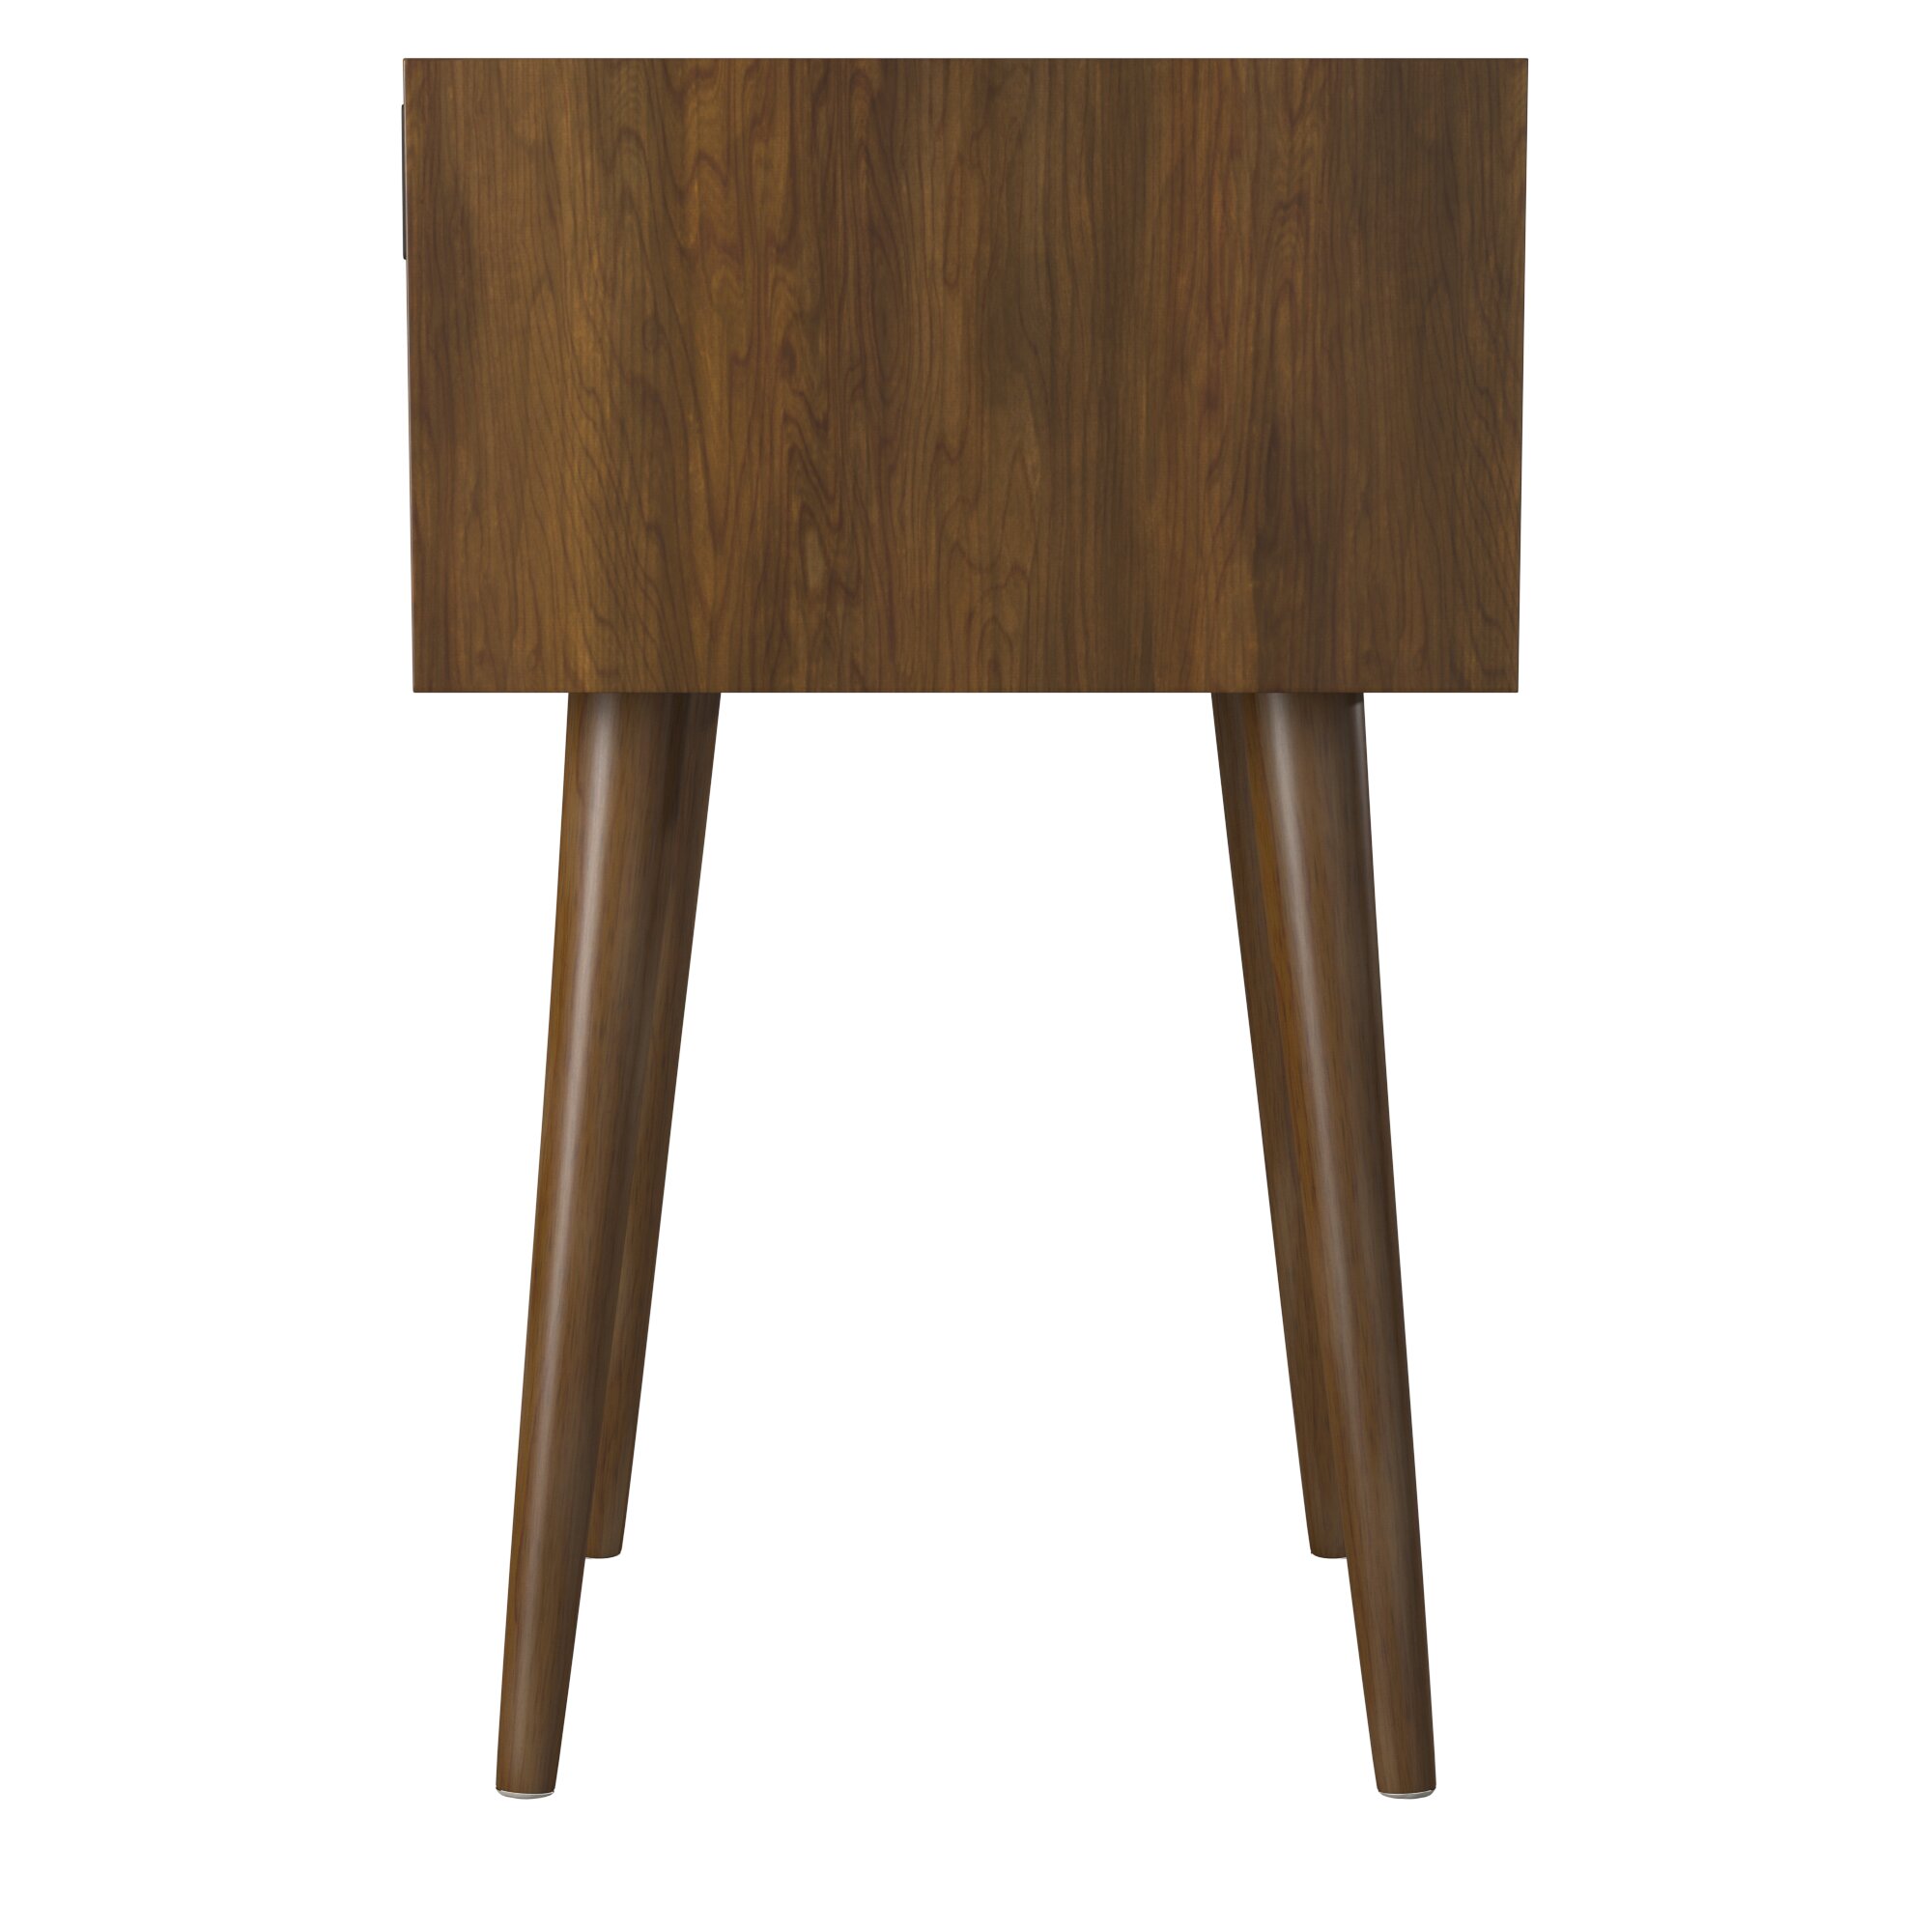 Picket House Furnishings Chesham 19 In W X 24 In H Cherry Wood Veneer Modern End Table With